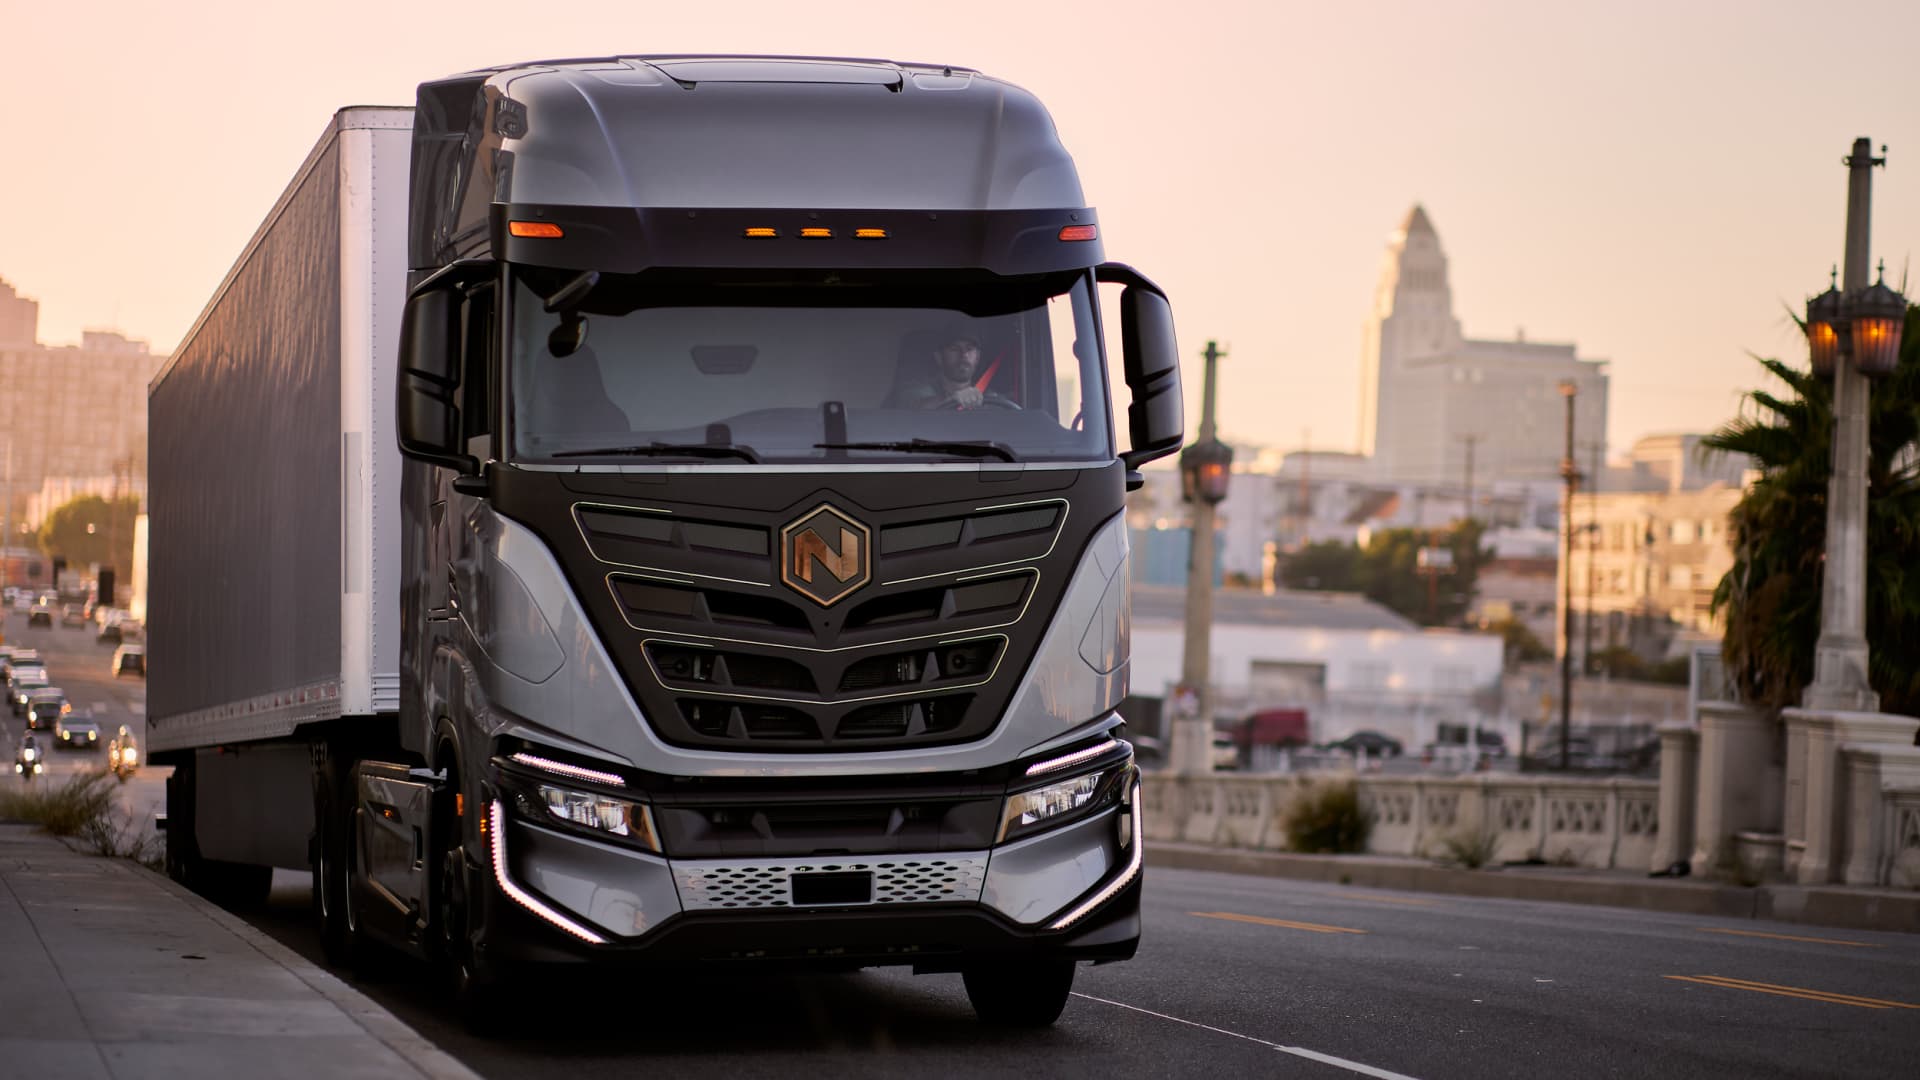 Nikola wins shareholder approval to issue new inventory, paving the way for significant fundraise